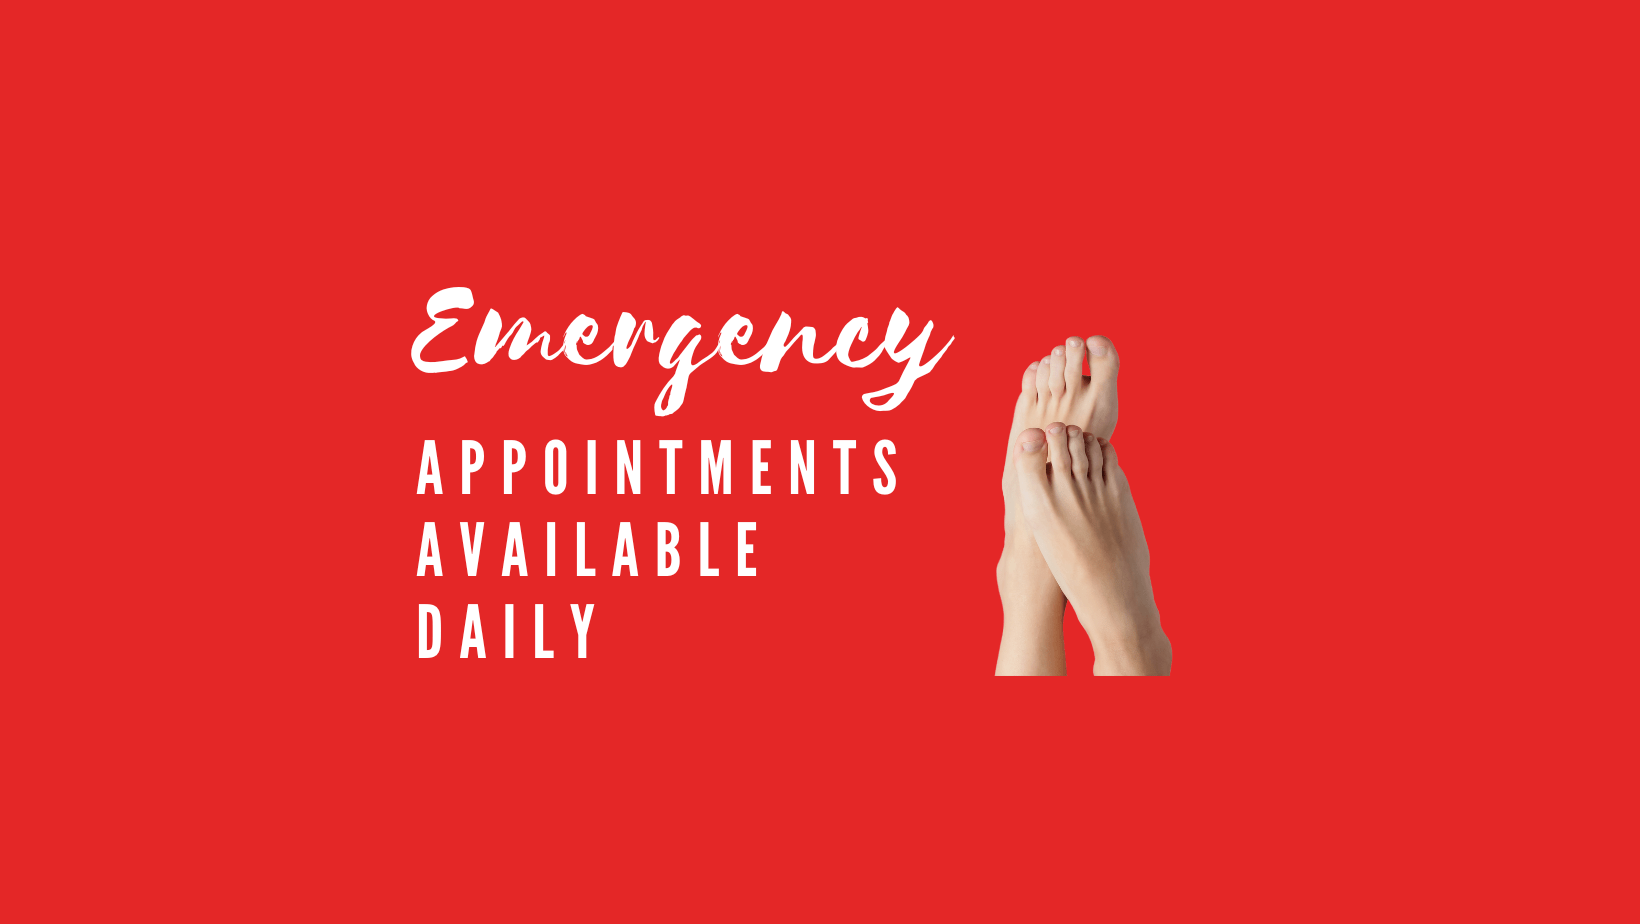 We offer Emergency appointments